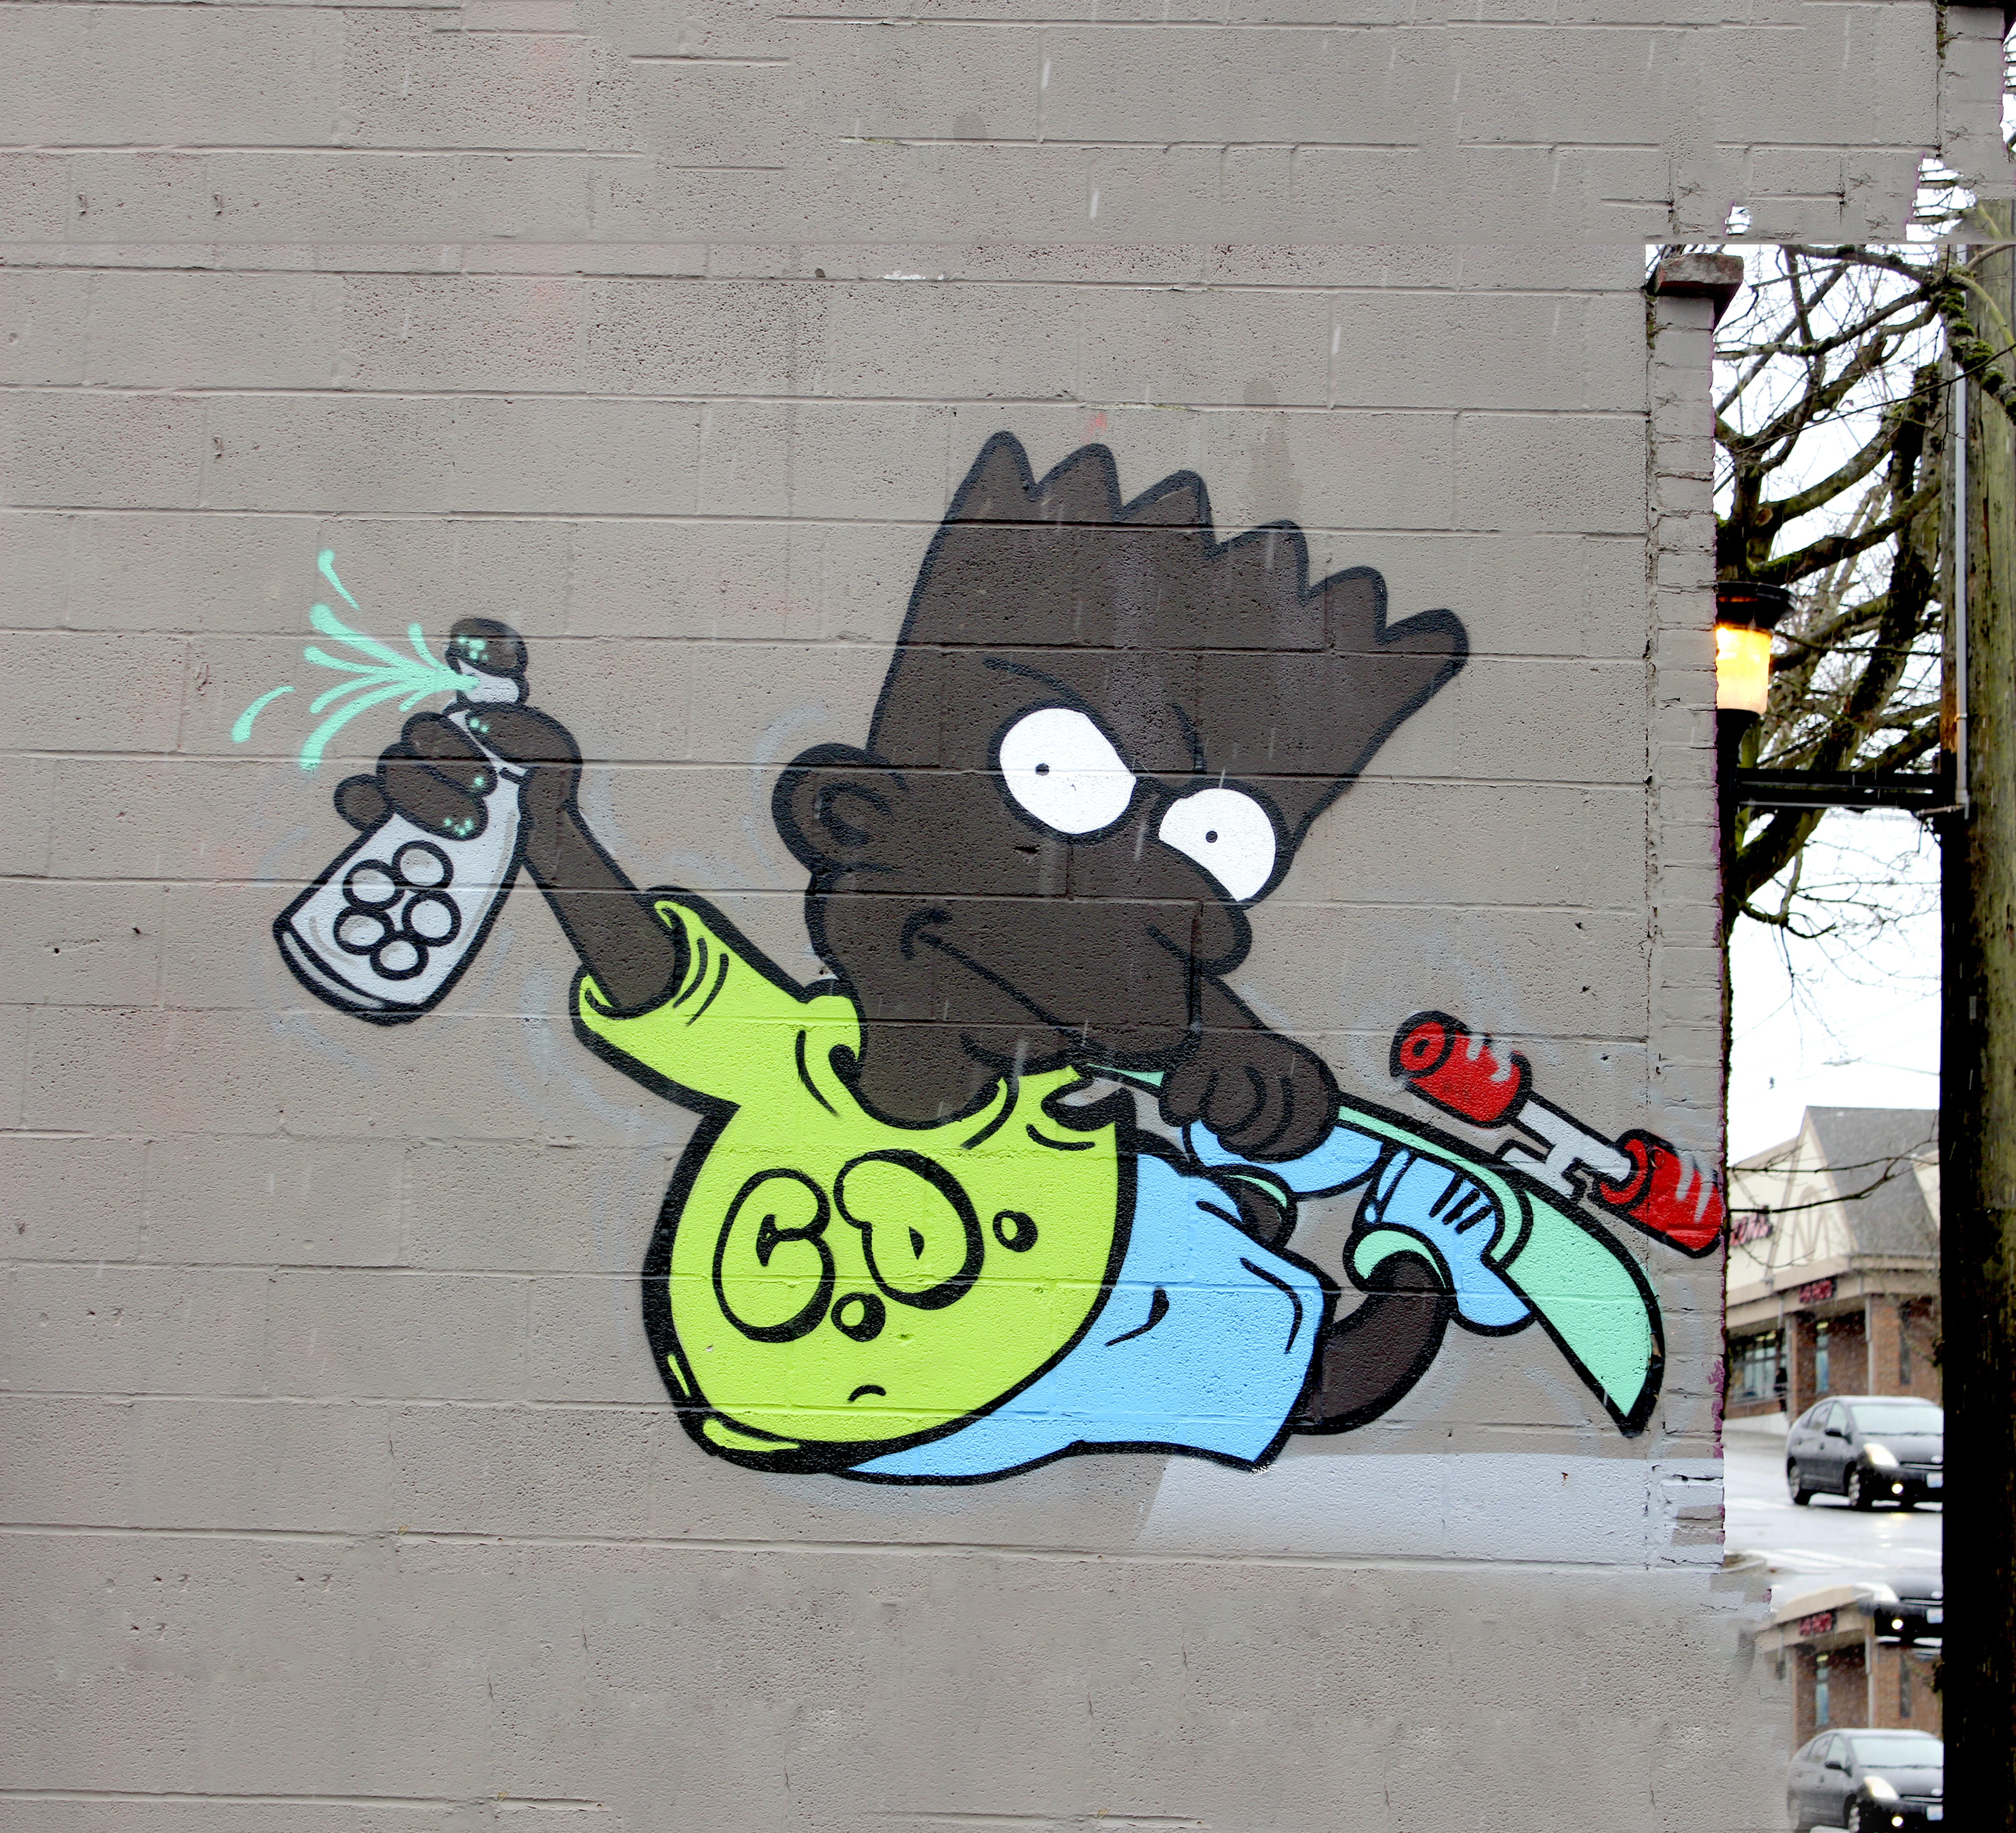 The Black Bart mural on 25th and Jackson is one of many public art pieces that dot the neighborhood.